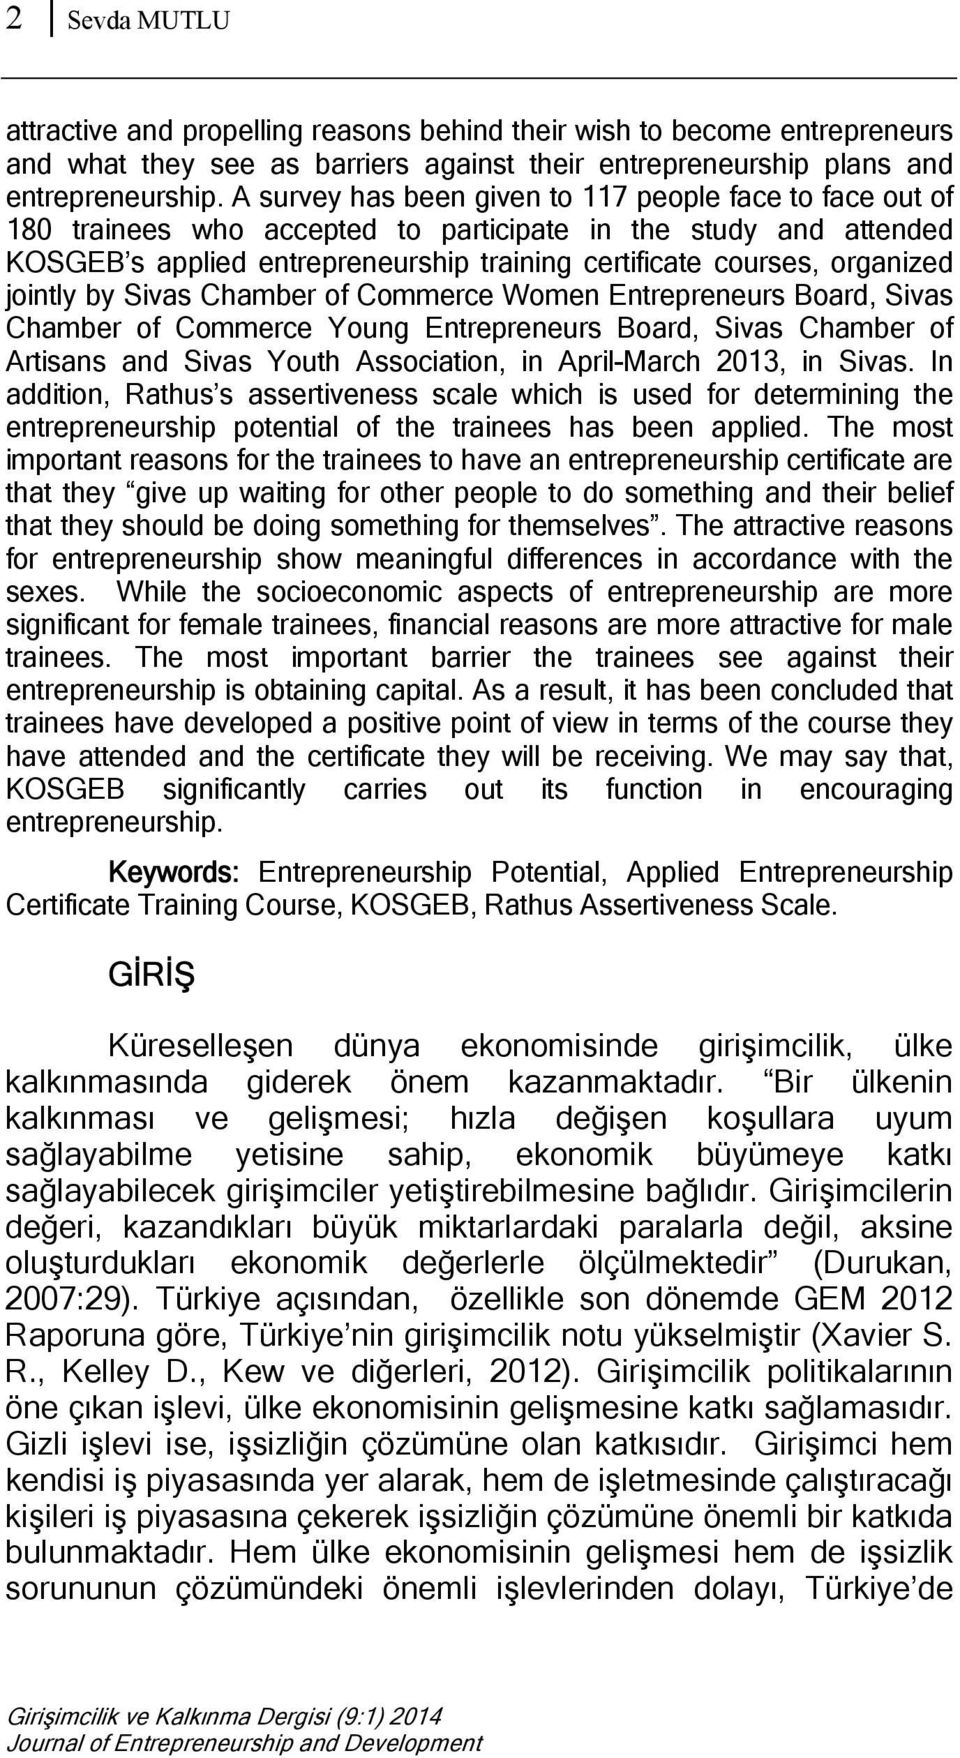 jointly by Sivas Chamber of Commerce Women Entrepreneurs Board, Sivas Chamber of Commerce Young Entrepreneurs Board, Sivas Chamber of Artisans and Sivas Youth Association, in April-March 2013, in